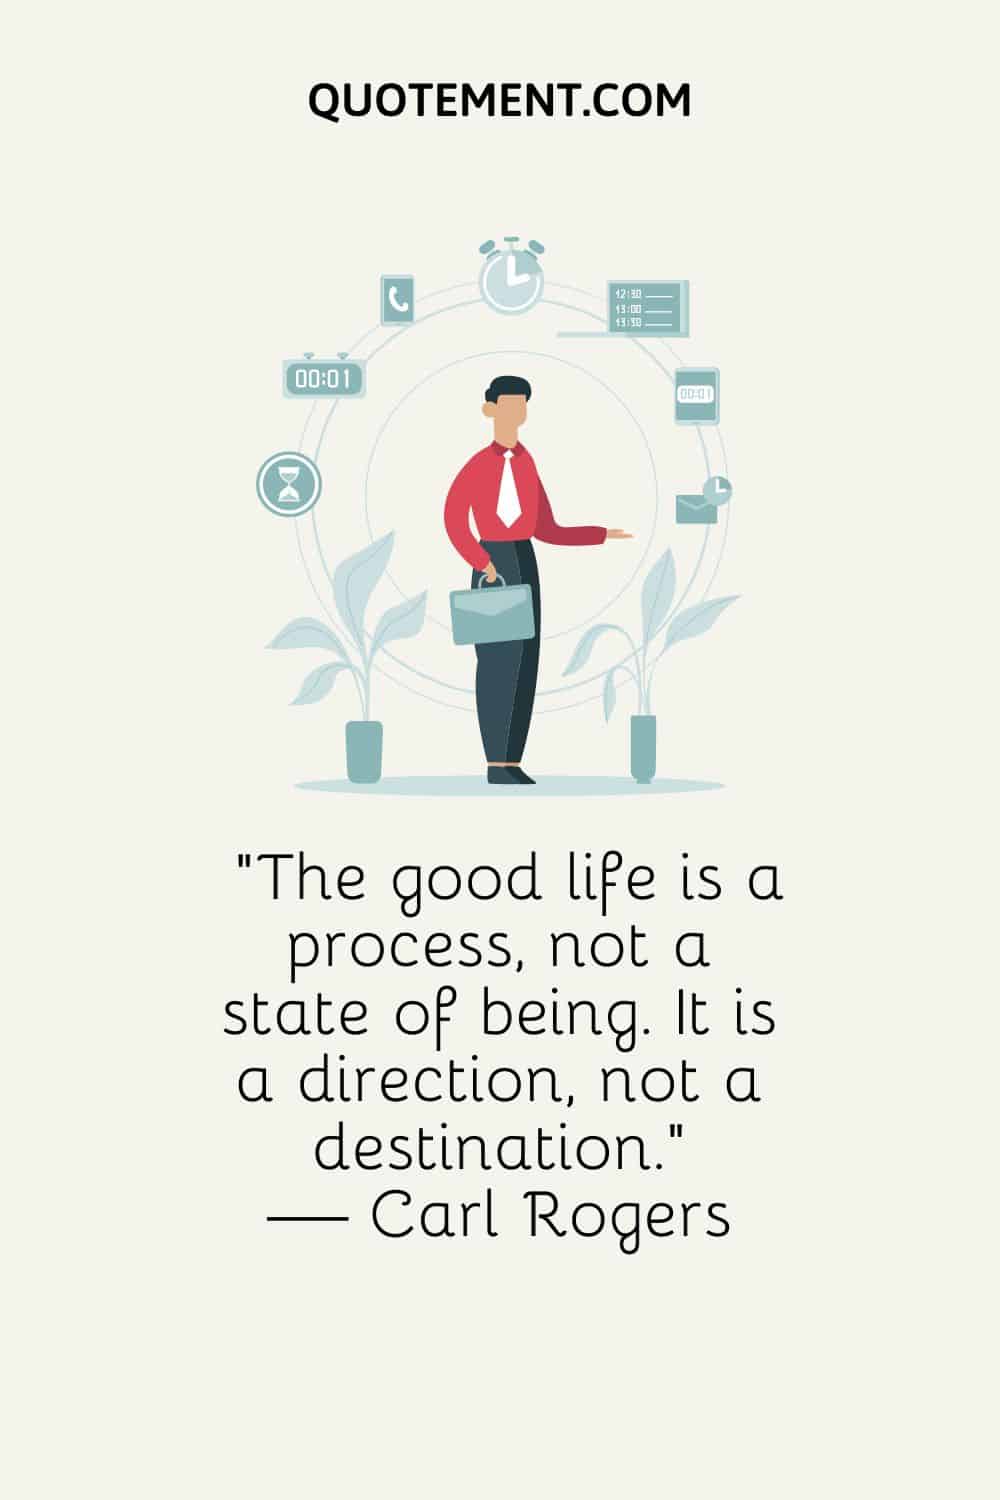 The good life is a process, not a state of being